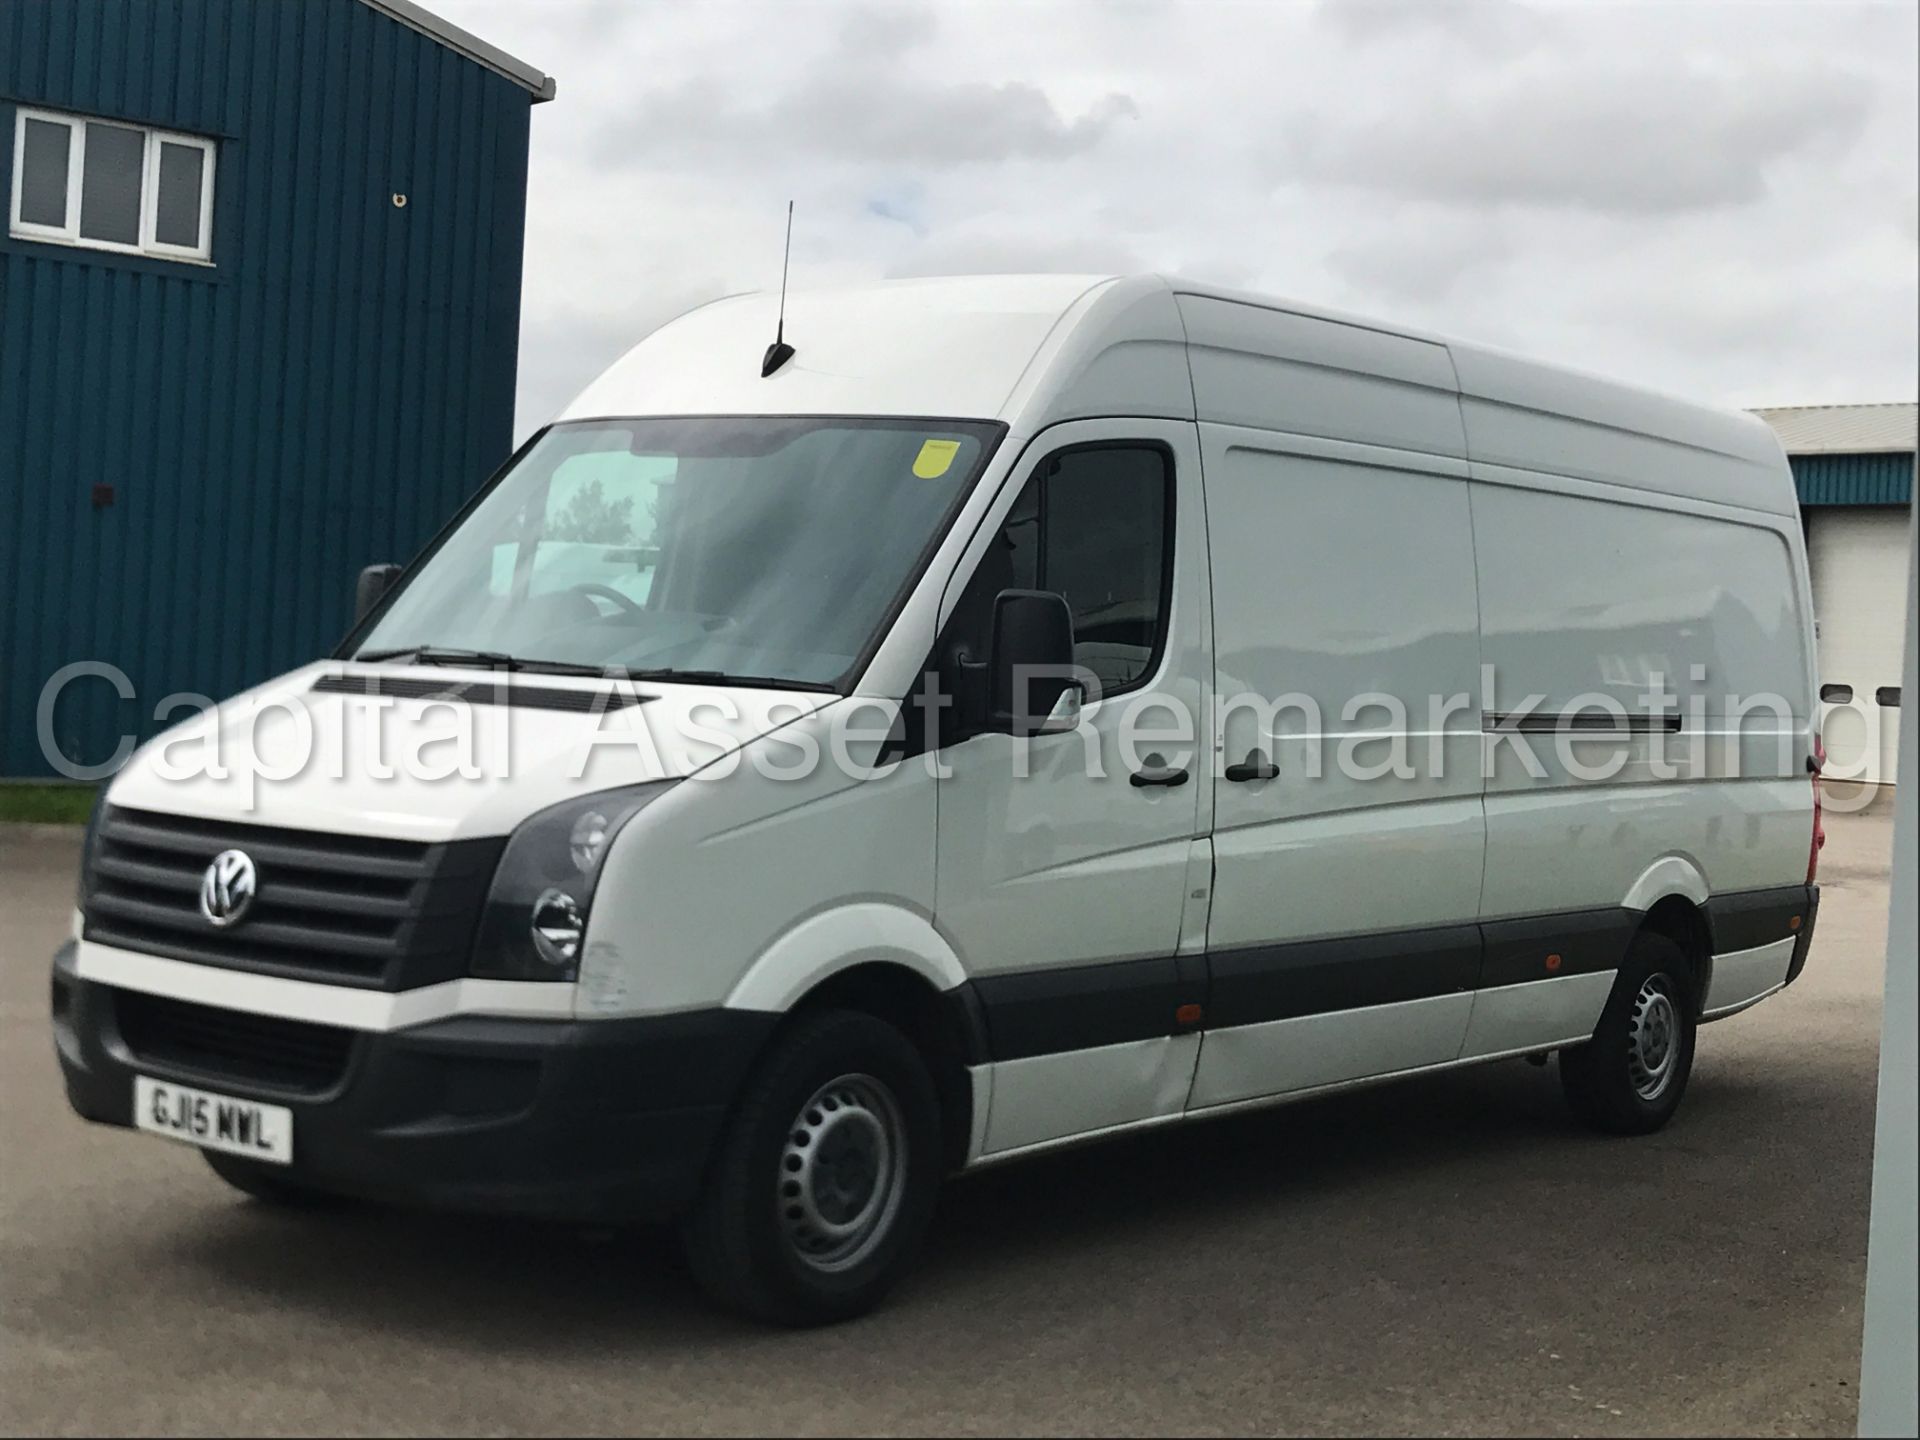 VOLKSWAGEN CRAFTER CR35 'LWB HI-ROOF' (2015) '2.0 TDI - 136 BHP - 6 SPEED' (1 COMPANY OWNER) - Image 4 of 24